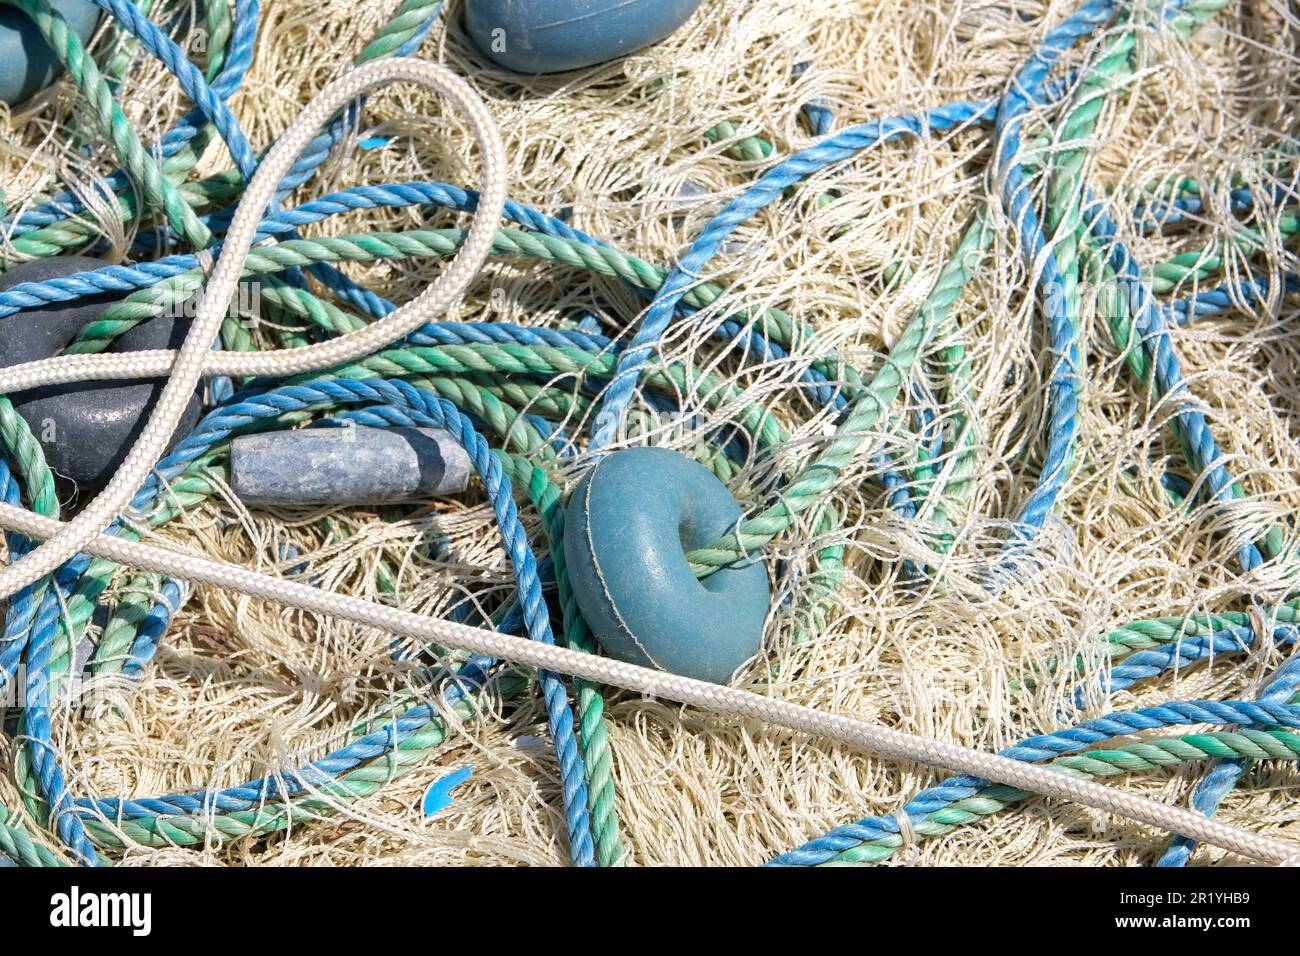 https://c8.alamy.com/comp/2R1YHB9/mixture-of-colorful-fishing-nets-floats-and-ropes-fisherman-material-background-2R1YHB9.jpg